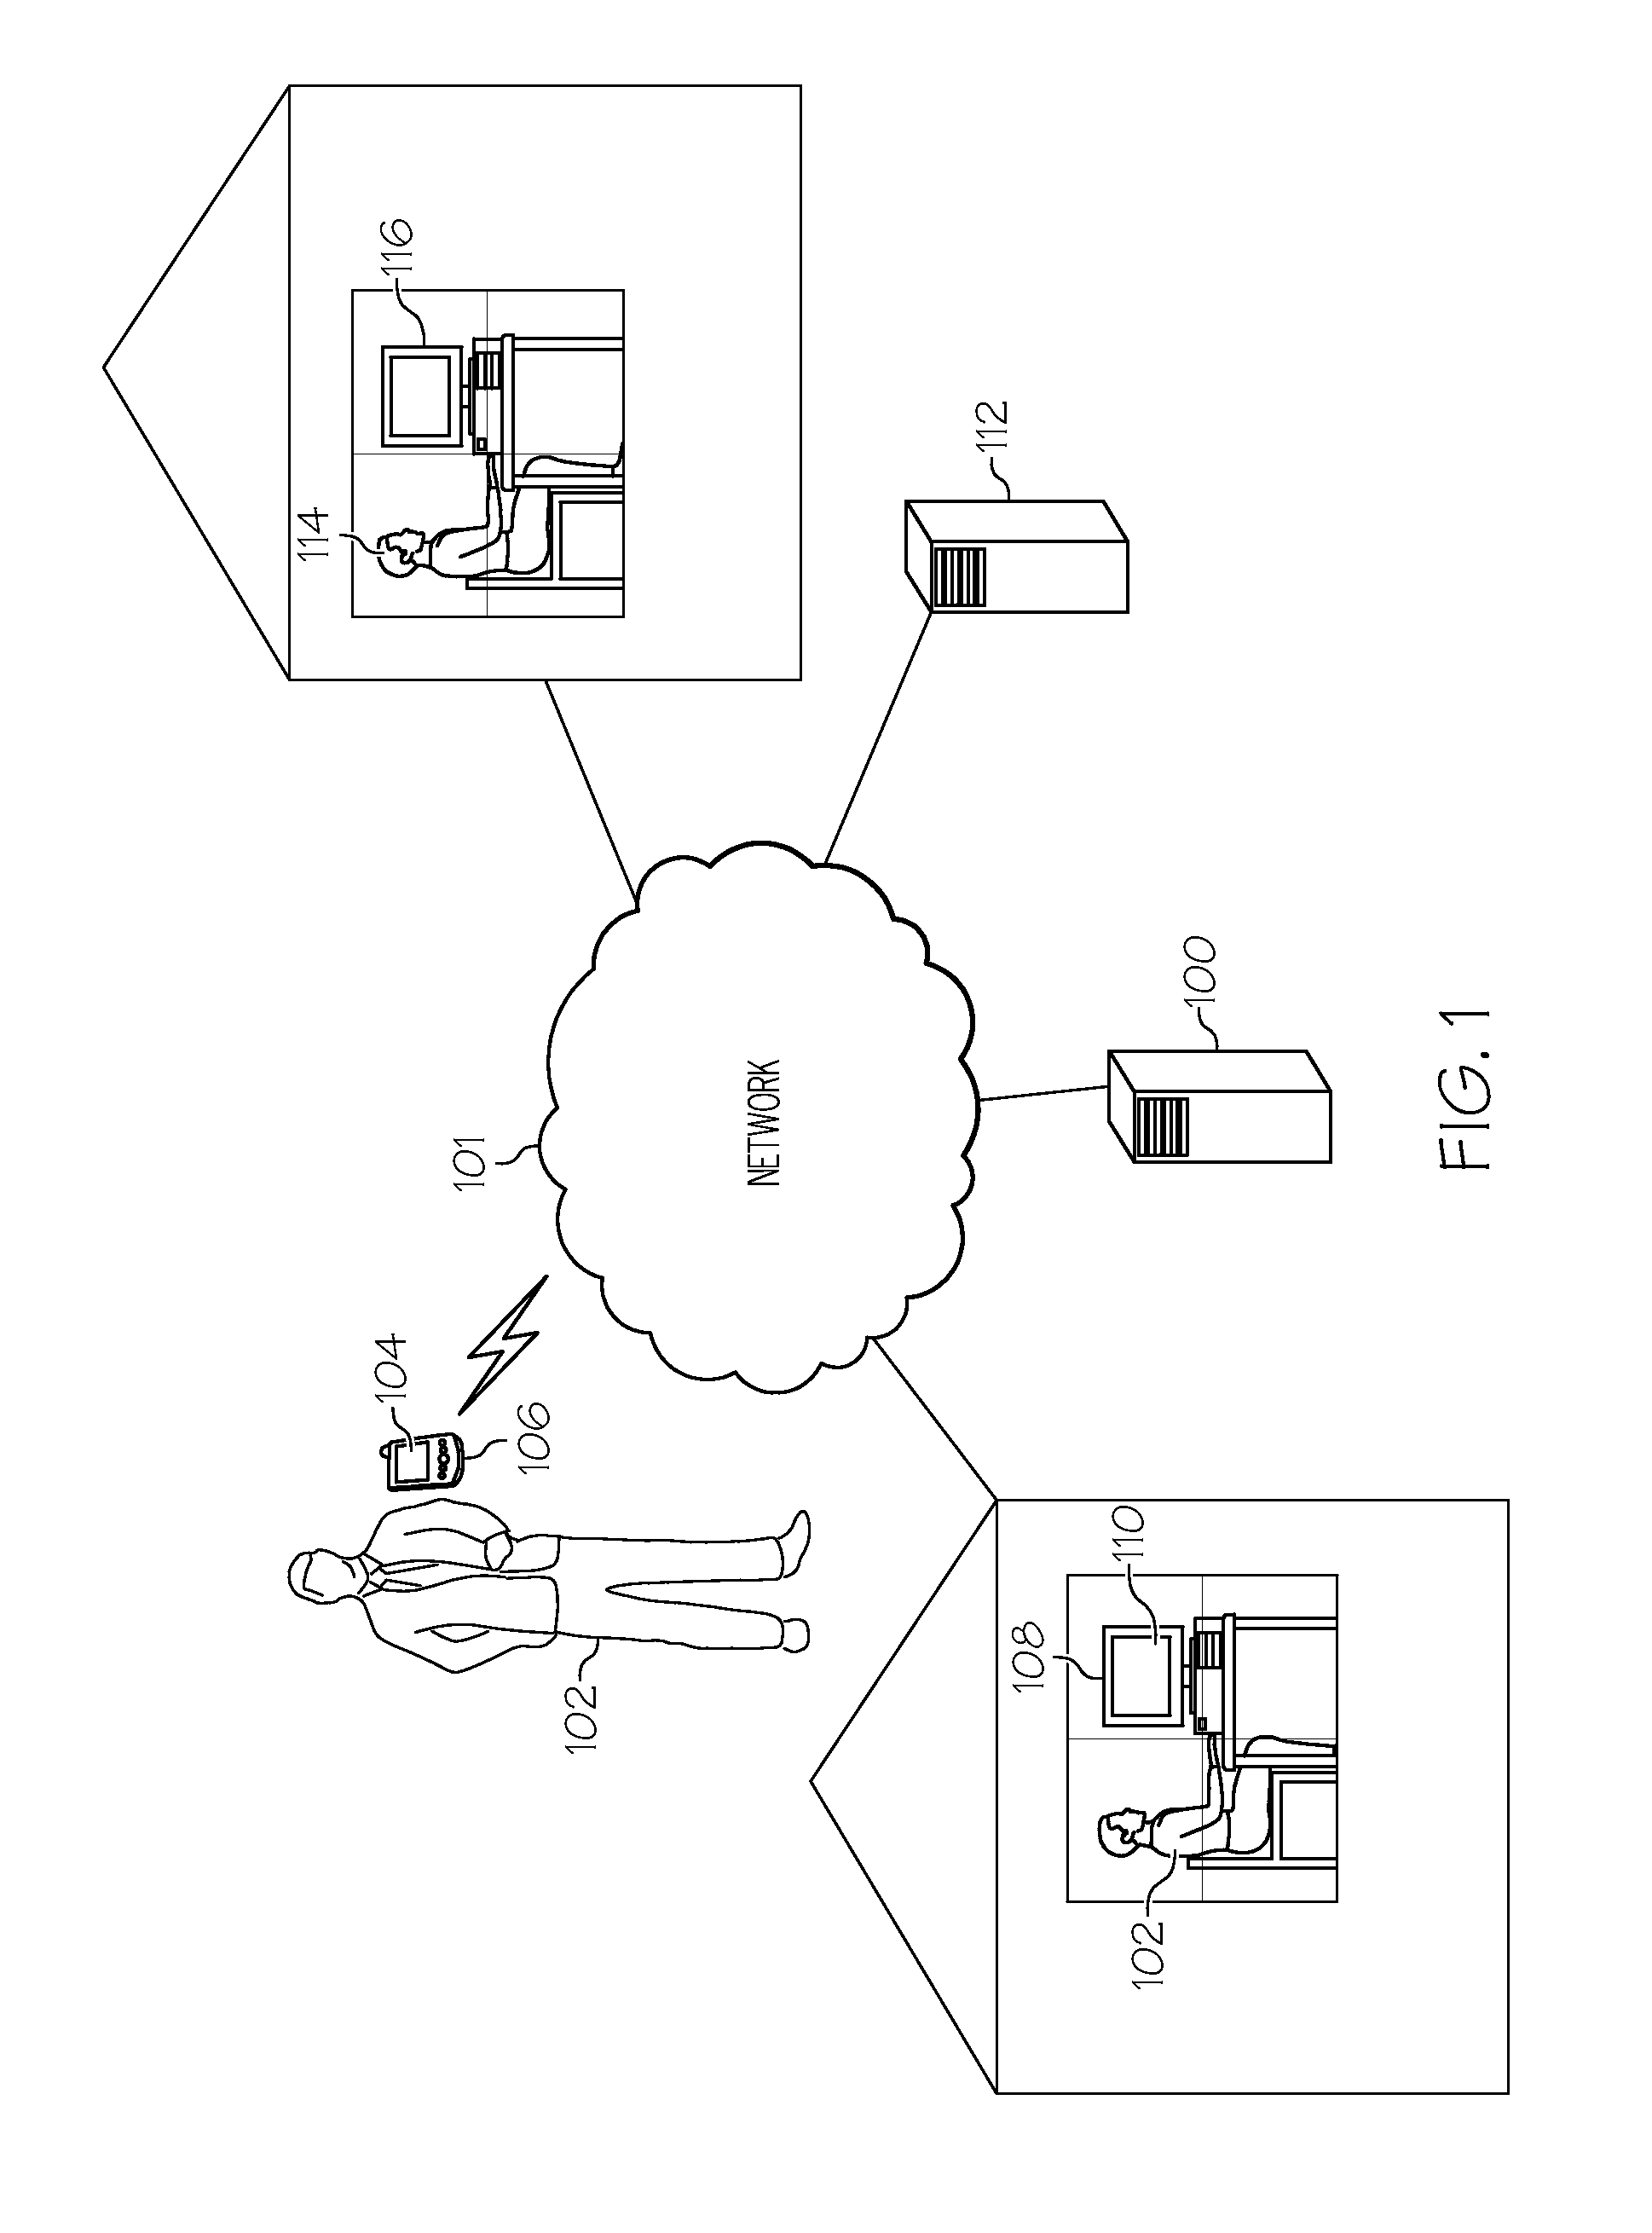 Systems and methods for matching a patient with a mental health care provider